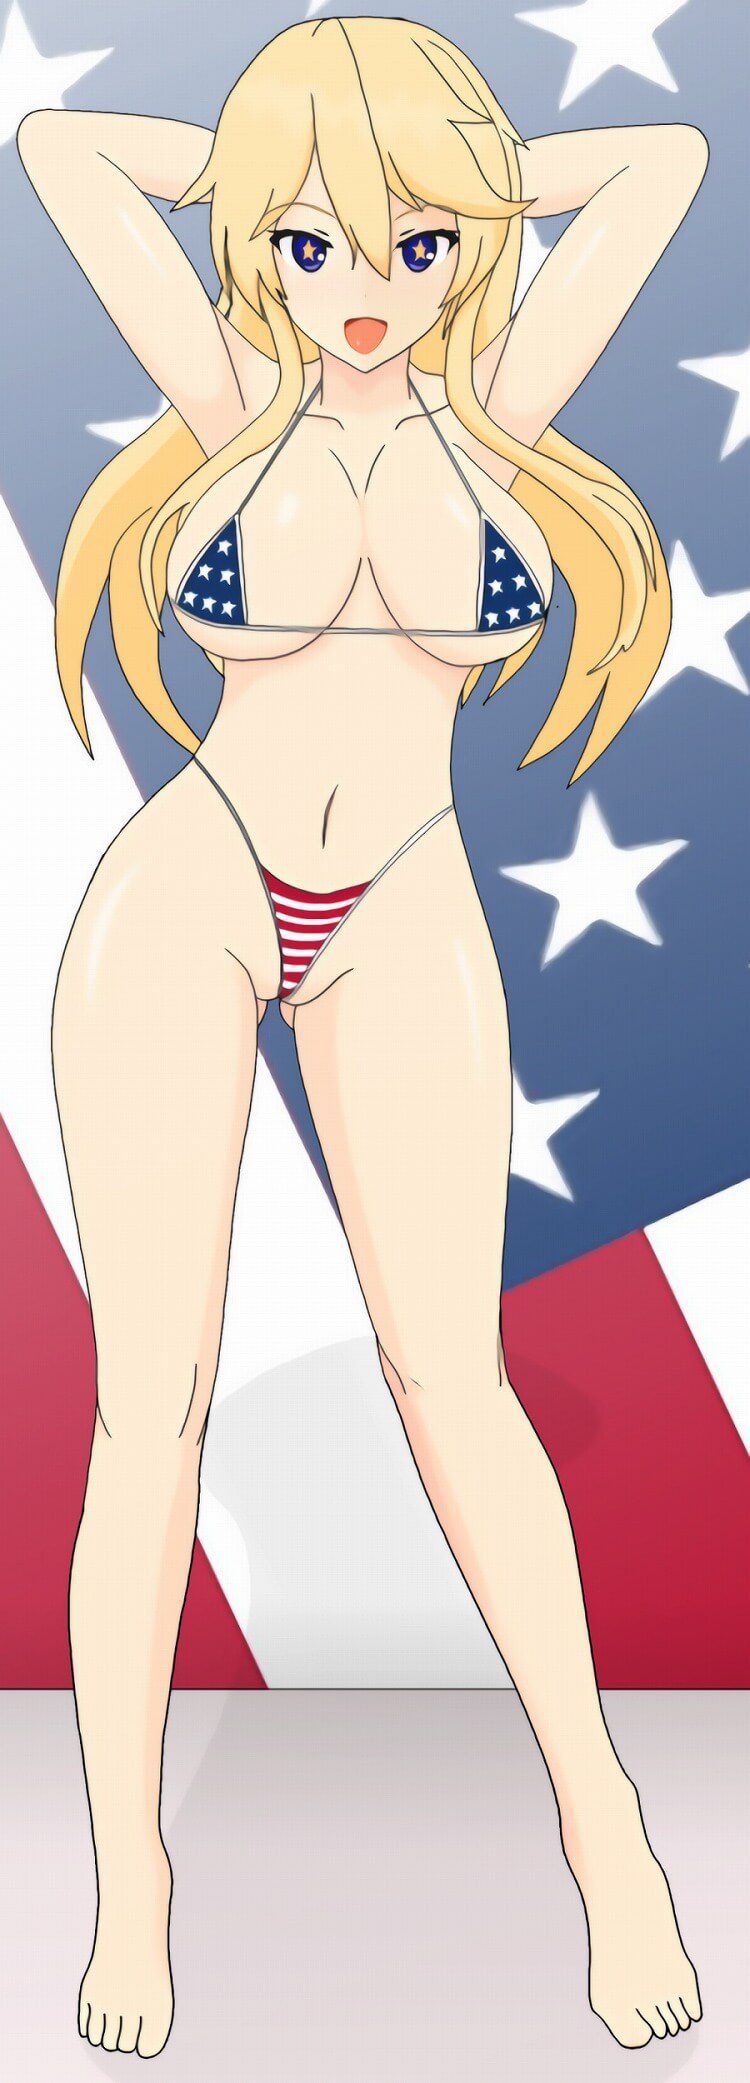 "Ship this 27 piece ' of Iowa American flag shorts or swimsuit photos 27